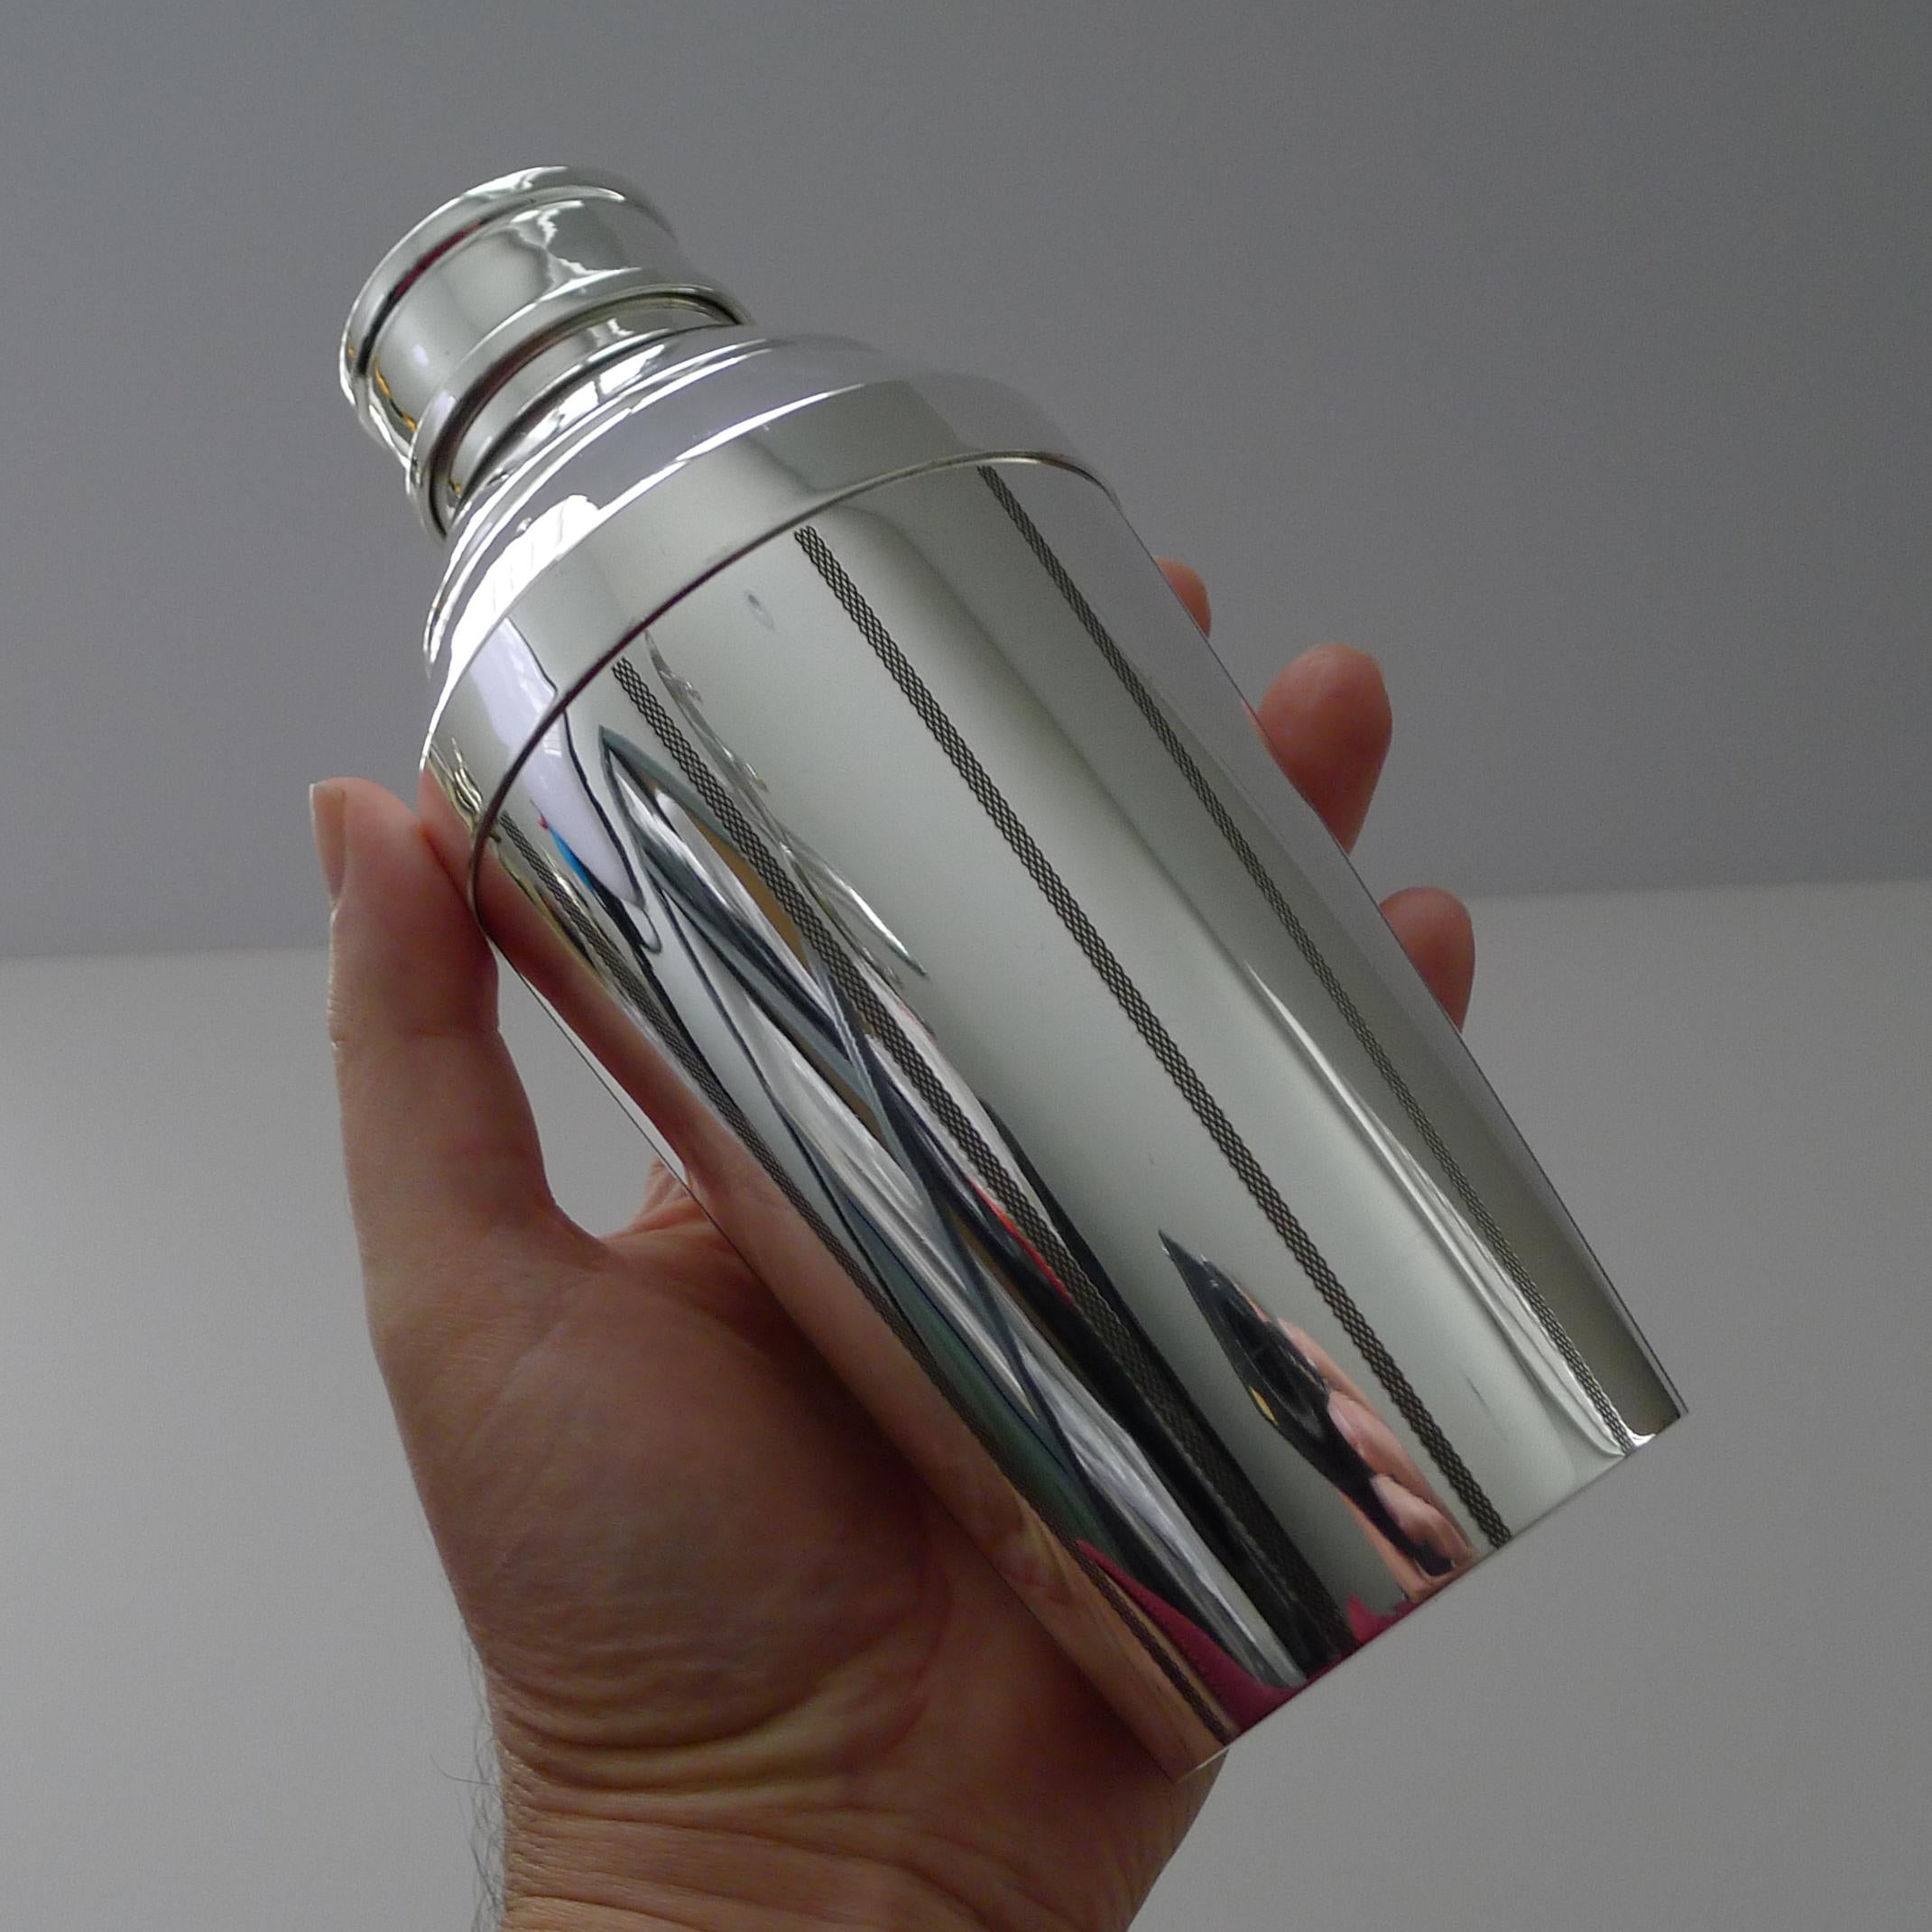 Mid-20th Century Smart Late Art Deco Cocktail Shaker In Silver Plate c.1940